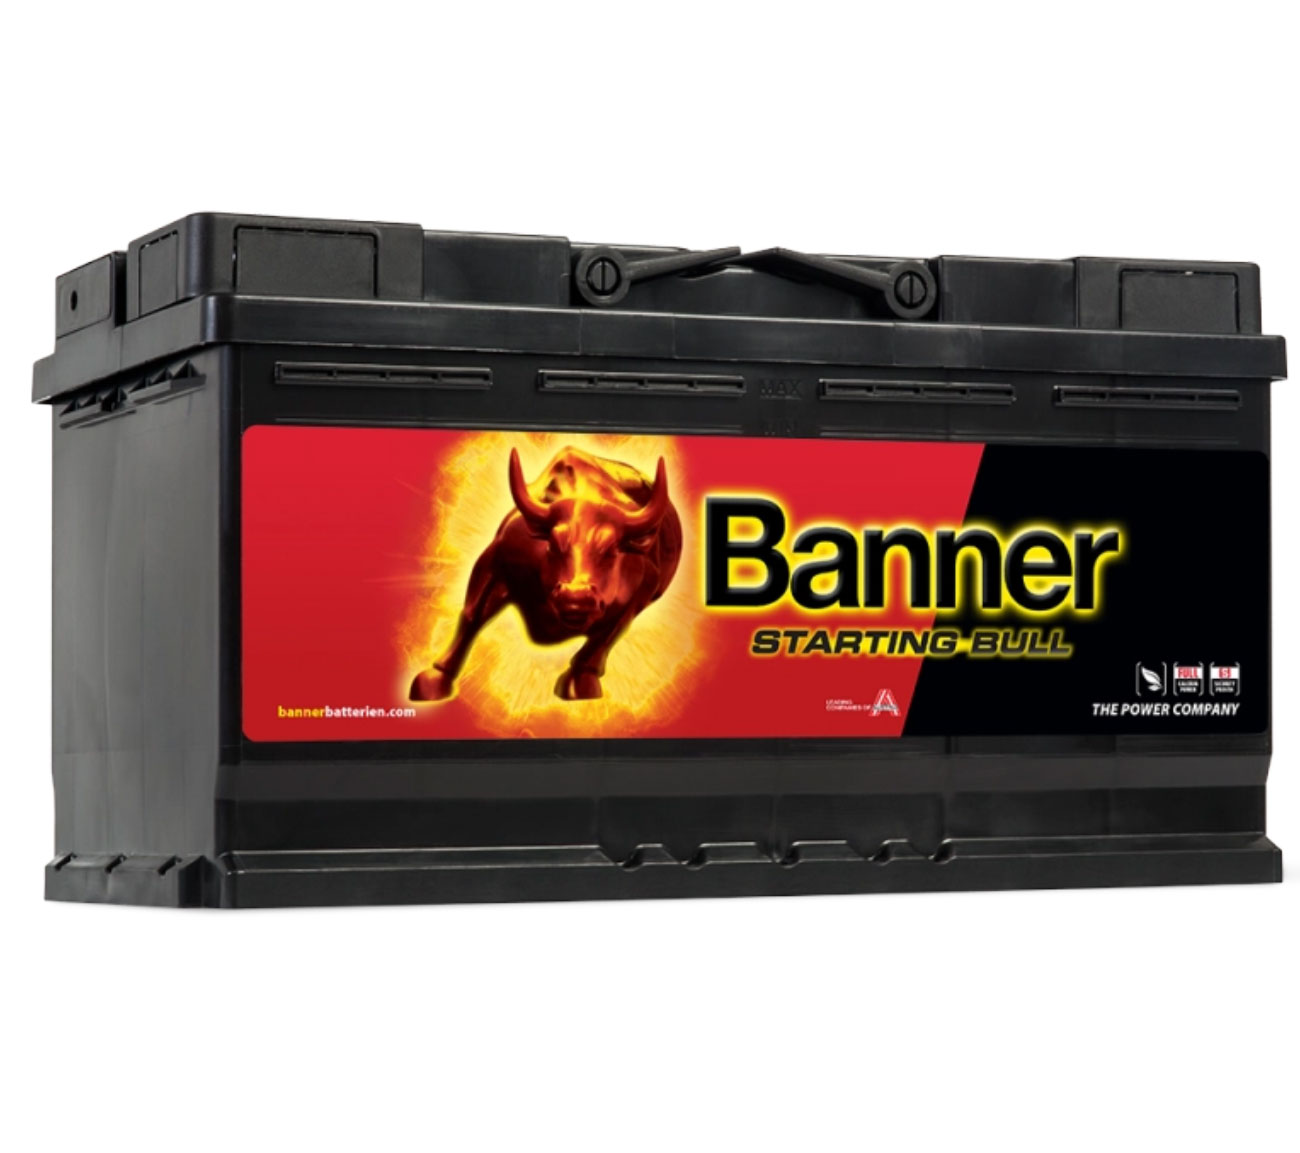 https://www.nautimarket-europe.com/open2b/var/products/285/84/0-5ce6115a-1300-Banner-Starting-Bull-12V-95Ah-battery-up-740A-Inrush-for-Auto-Camper-Van-Boat-N51120050510.jpg